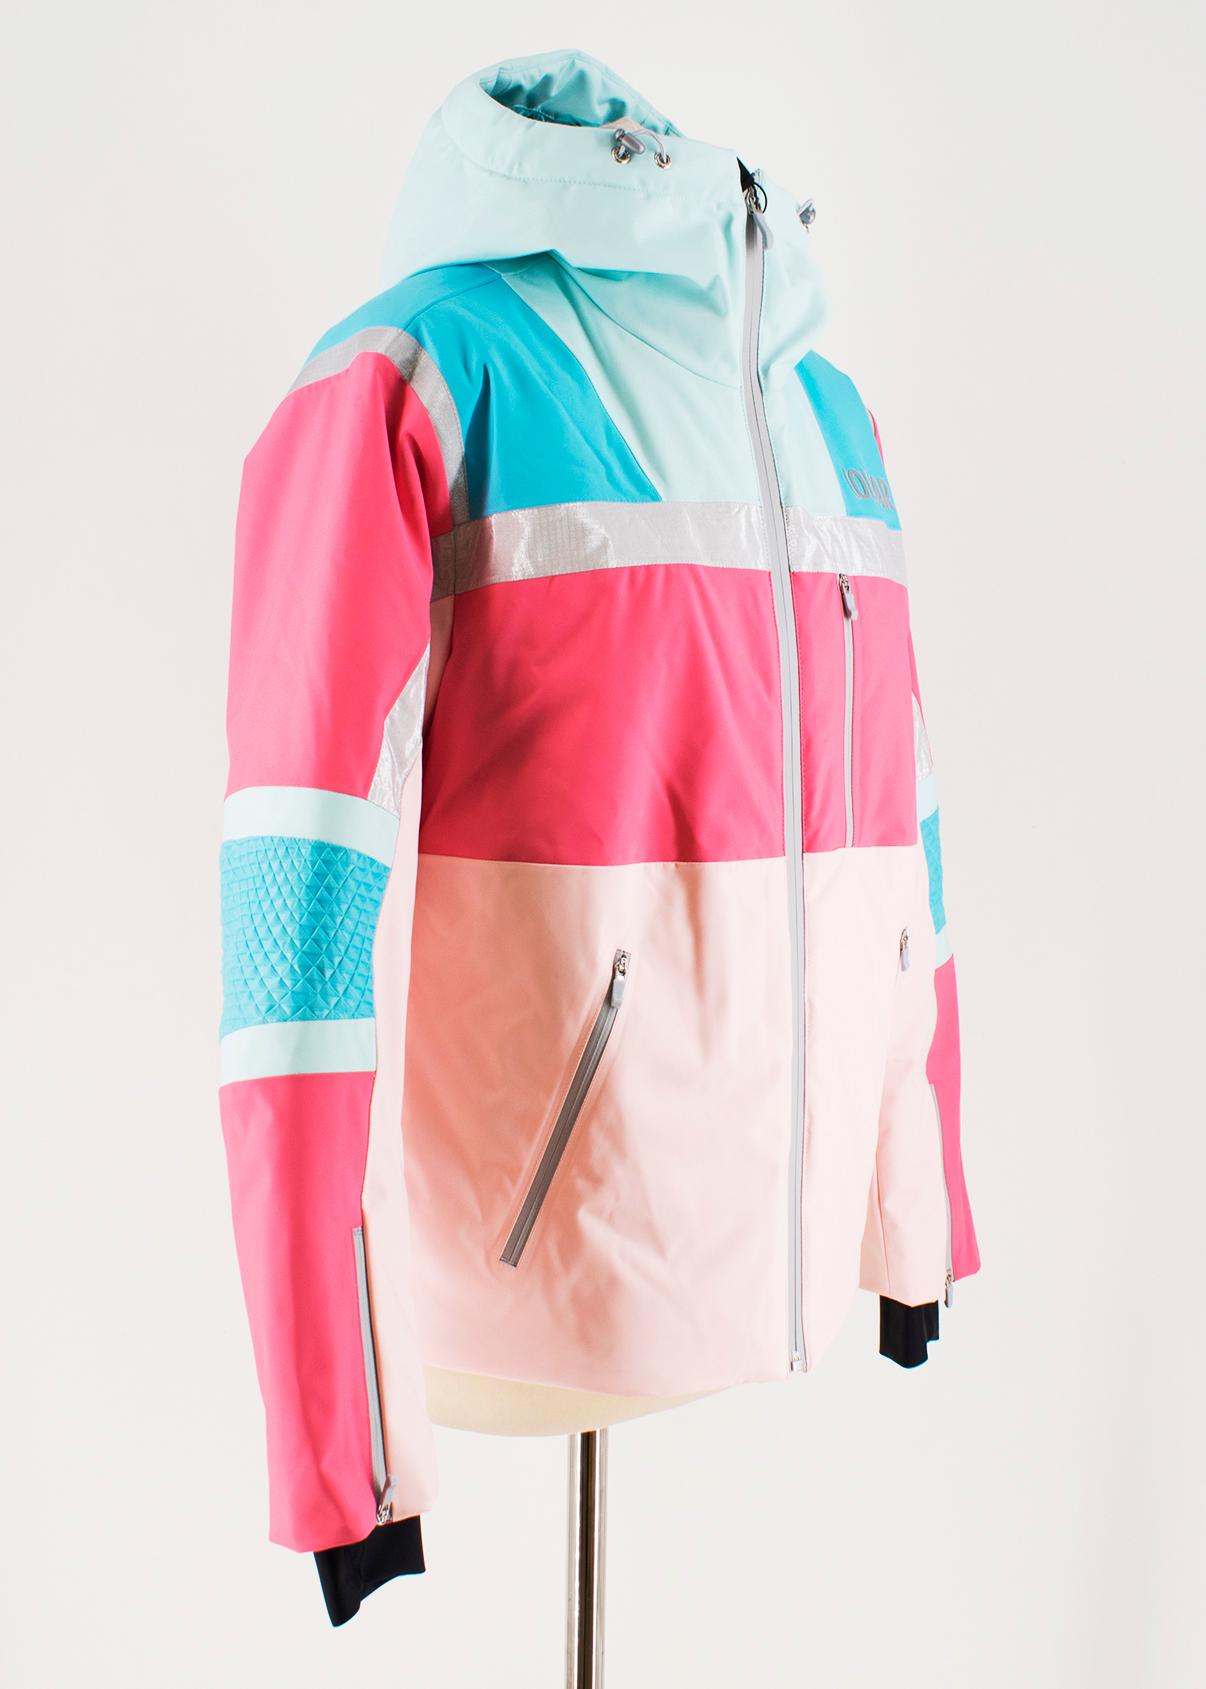 Colmar Neon Pink Ski Jacket & Trousers Set

Trousers: 
-Neon pink, polyester shell, nylon lining
-Padded with 80 gr ThermoreÂ® ThermosoftÂ®
-Mechanical stretch fabric
-Water-repellent Teflon EcoEliteâ„¢ treatment
-Two side zip pockets
-Five belt